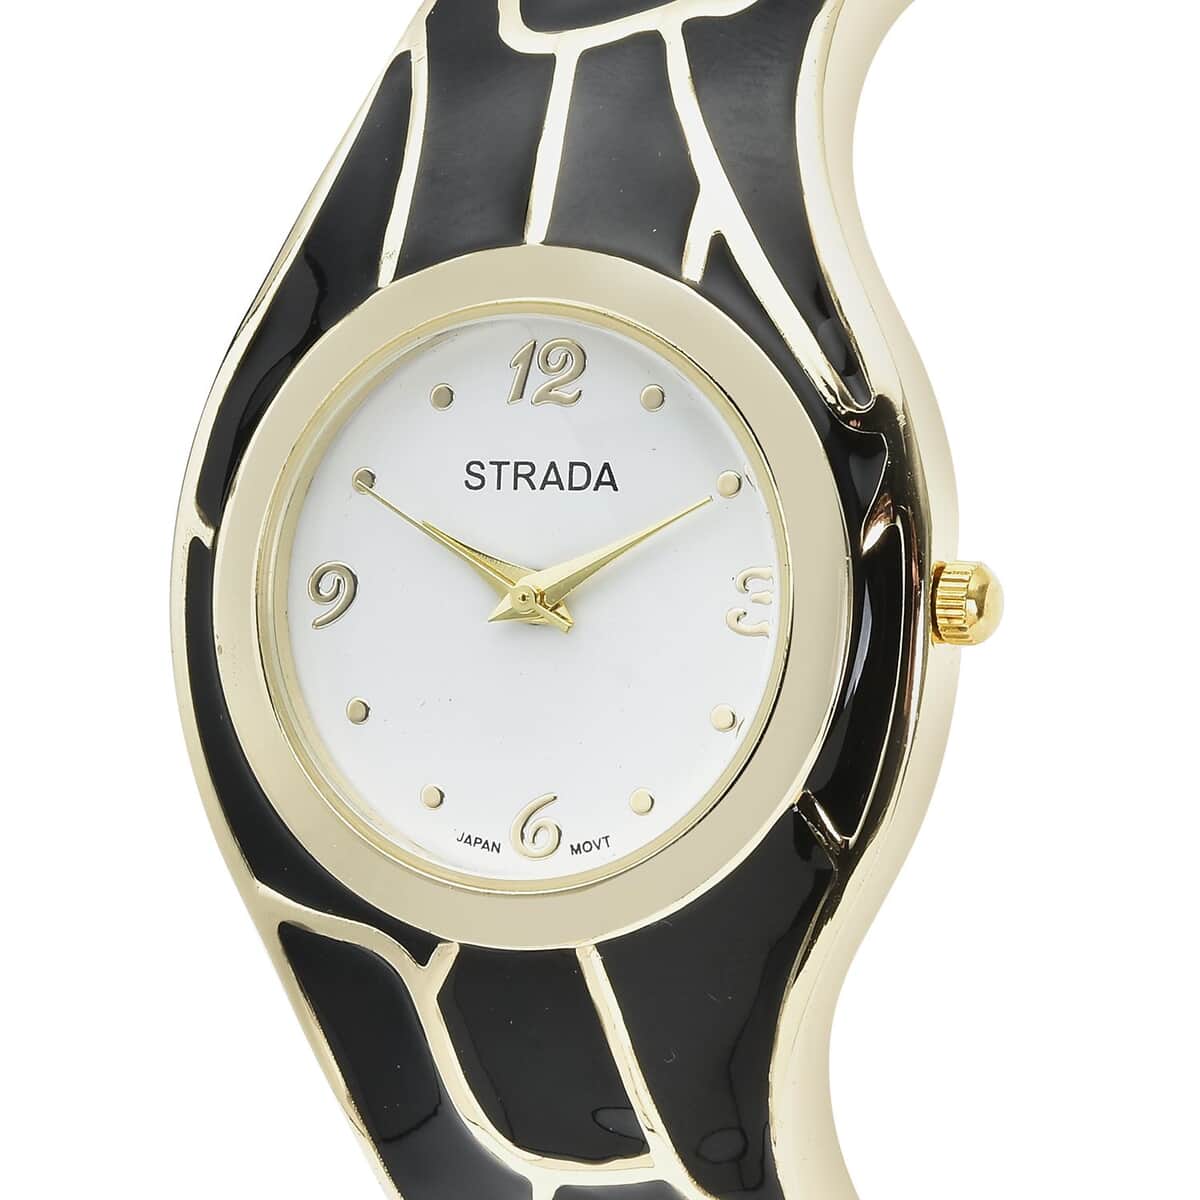 Strada Black Enameled Japanese Movement Watch in Goldtone Strap (29.50mm) (7.0-7.75 Inch) image number 3